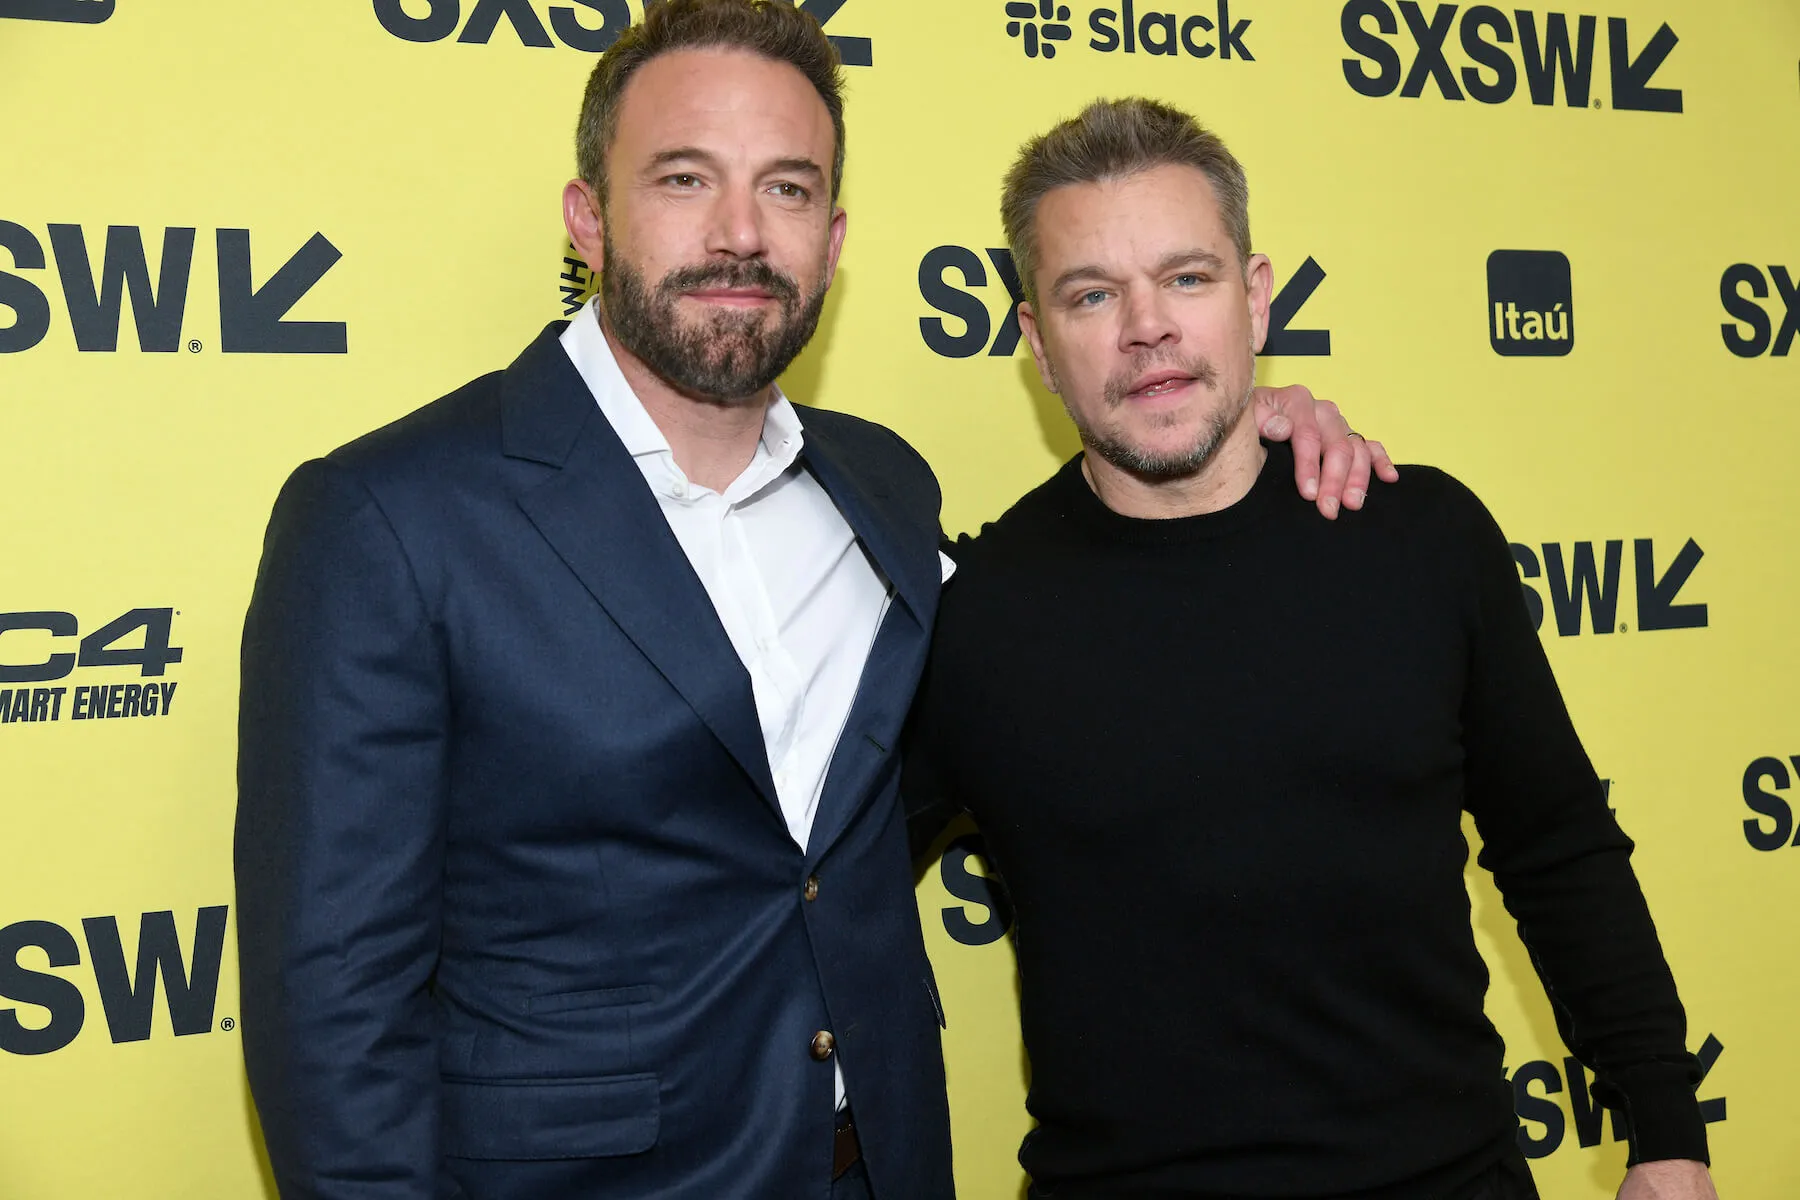 Ben Affleck with his arm around Matt Damon's shoulders against a yellow SXSW backdrop in 2023